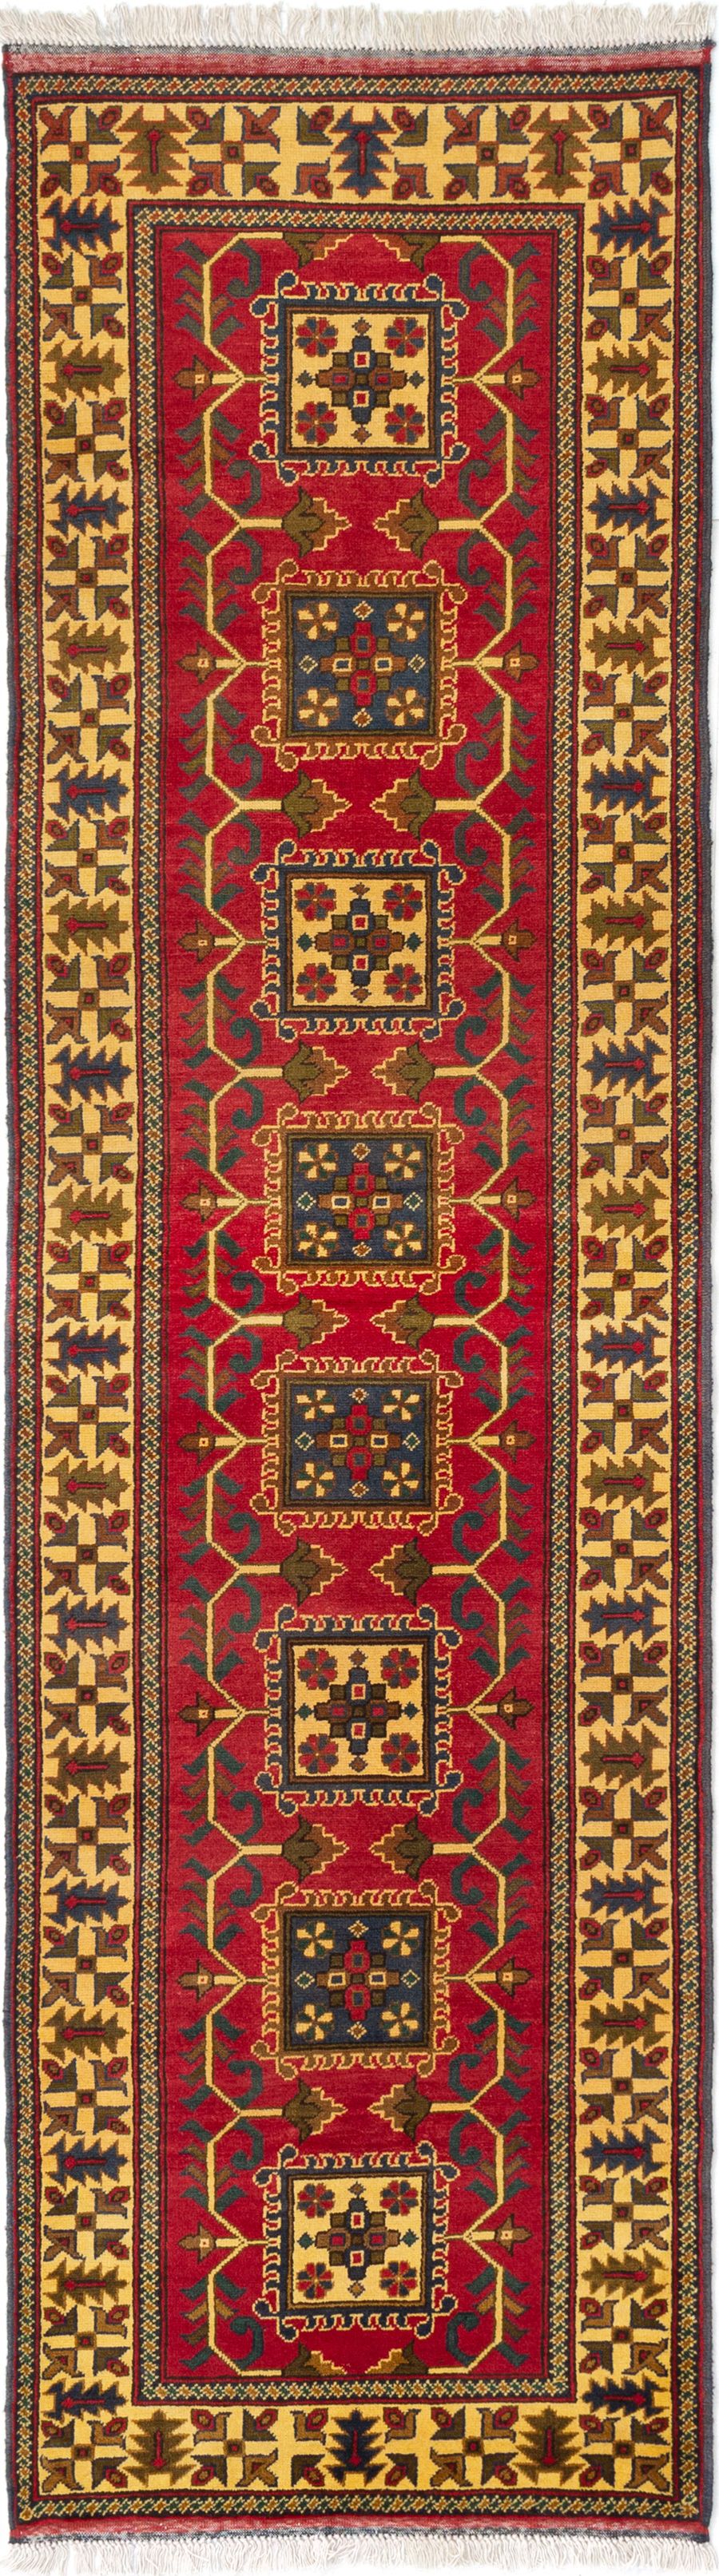 Hand-knotted Finest Kargahi Red Wool Rug 2'9" x 9'11"  Size: 2'9" x 9'11"  